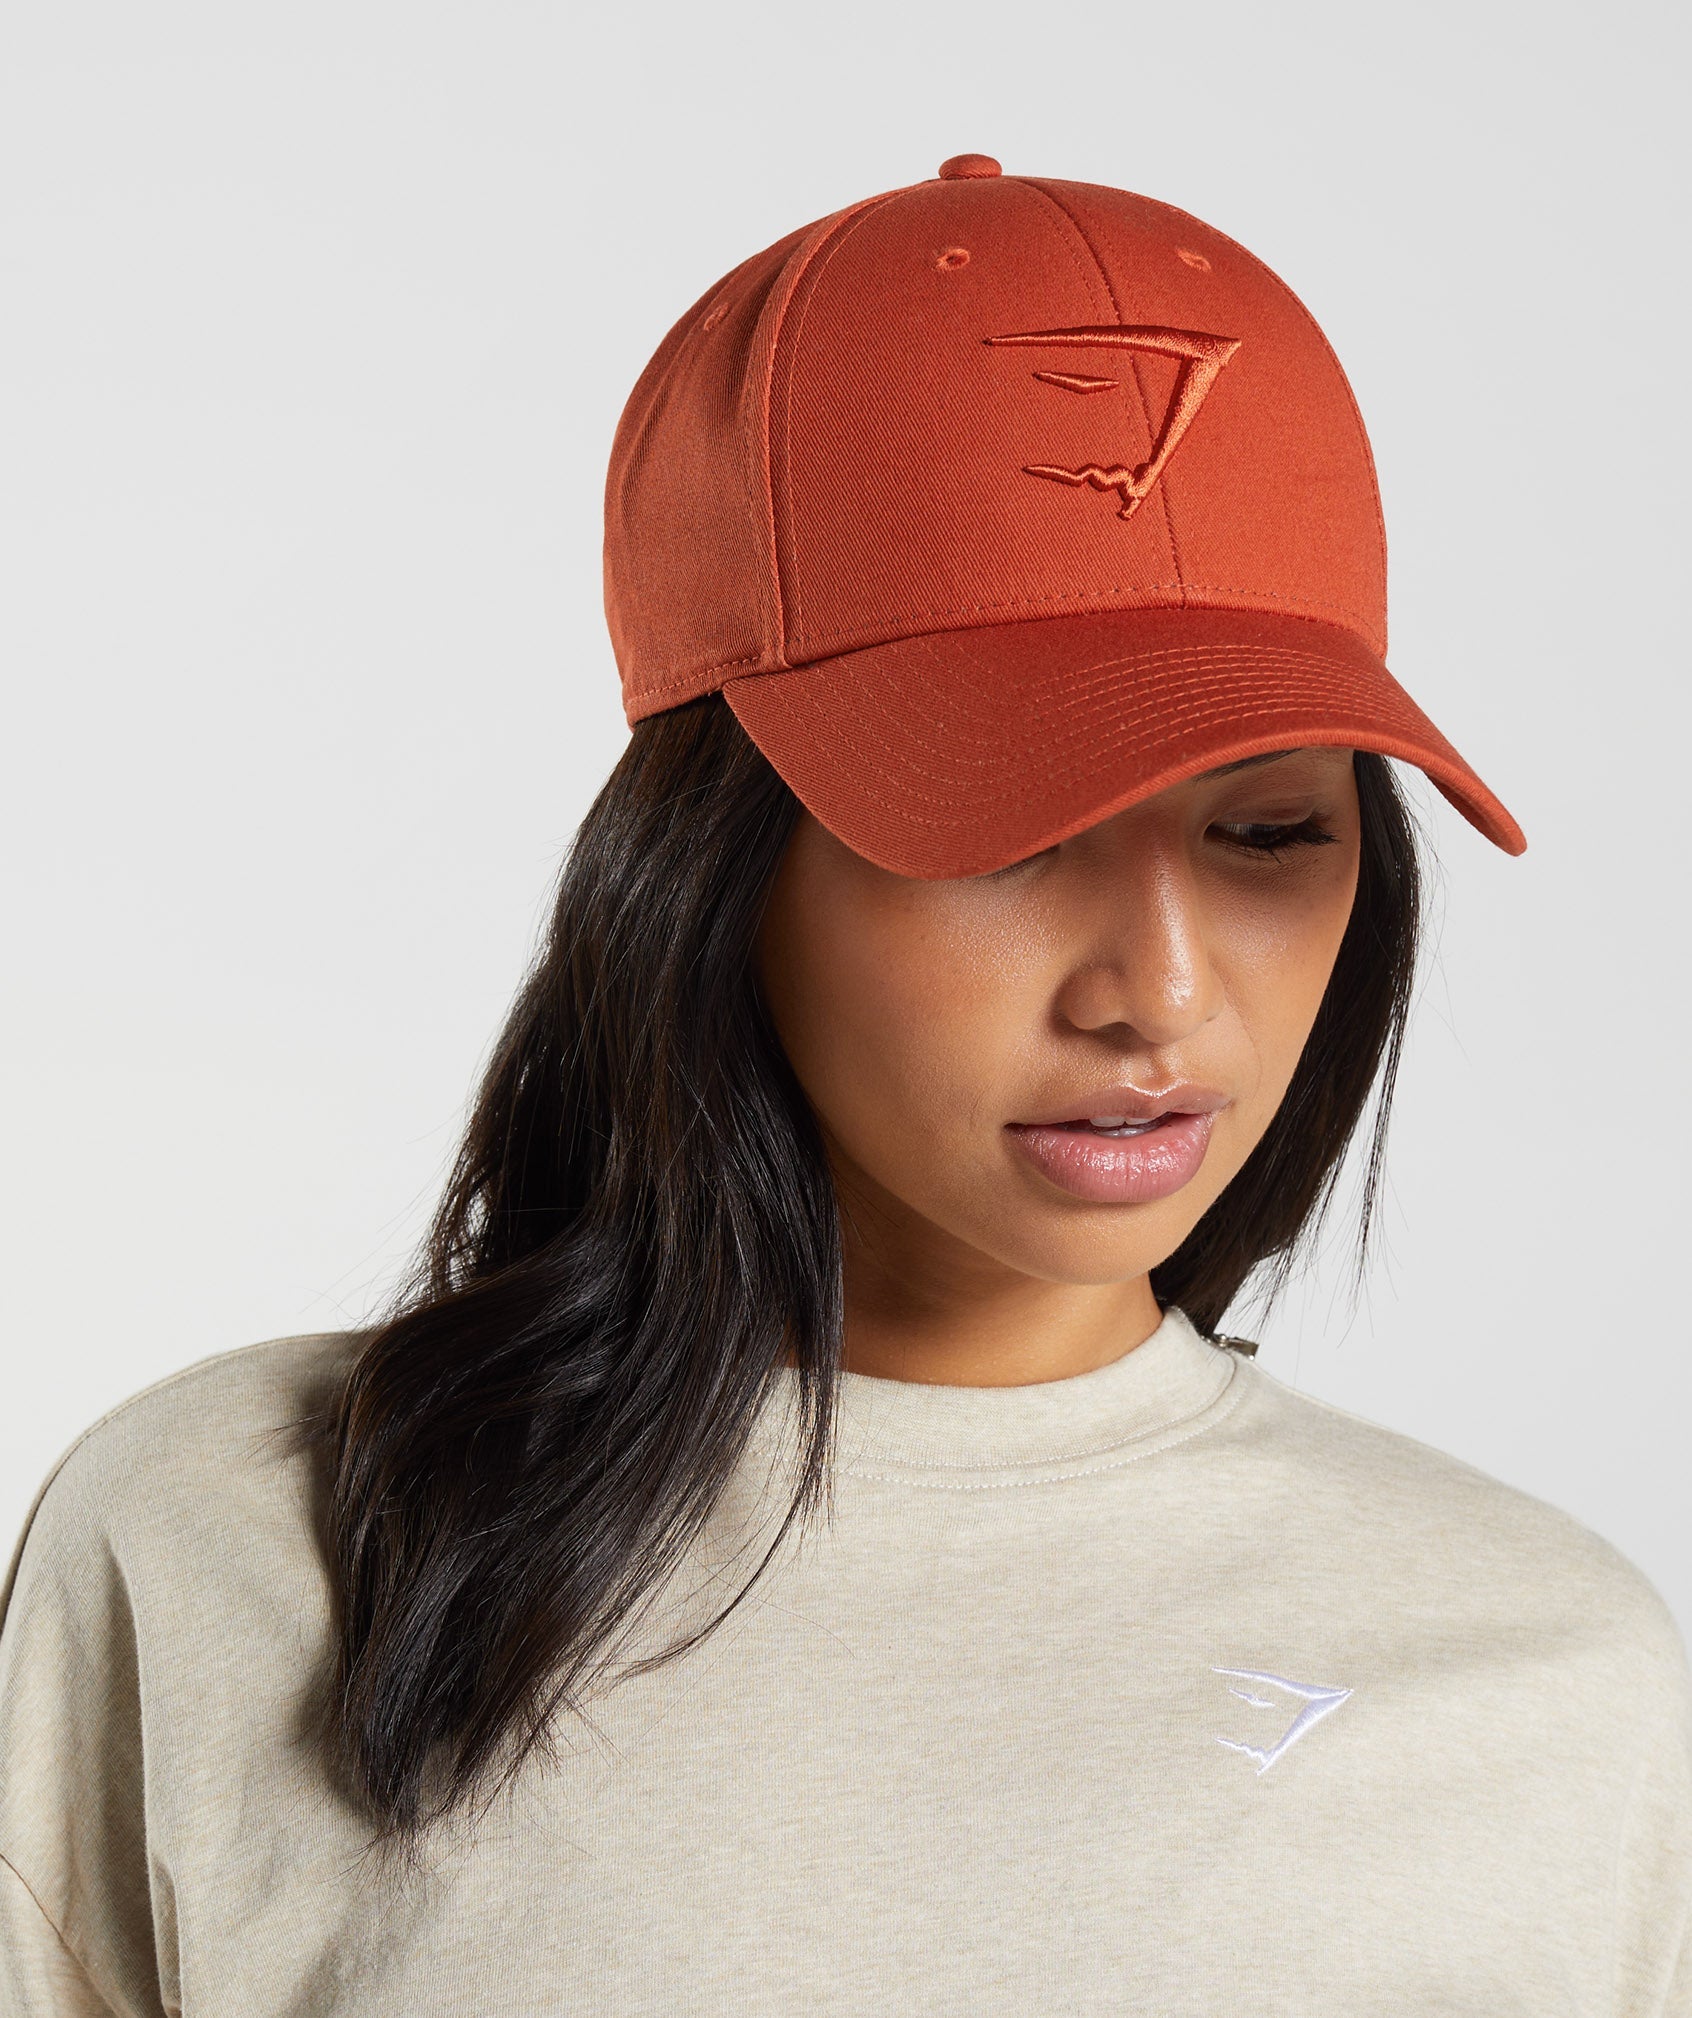 Sharkhead Cap in Cayenne Red - view 2